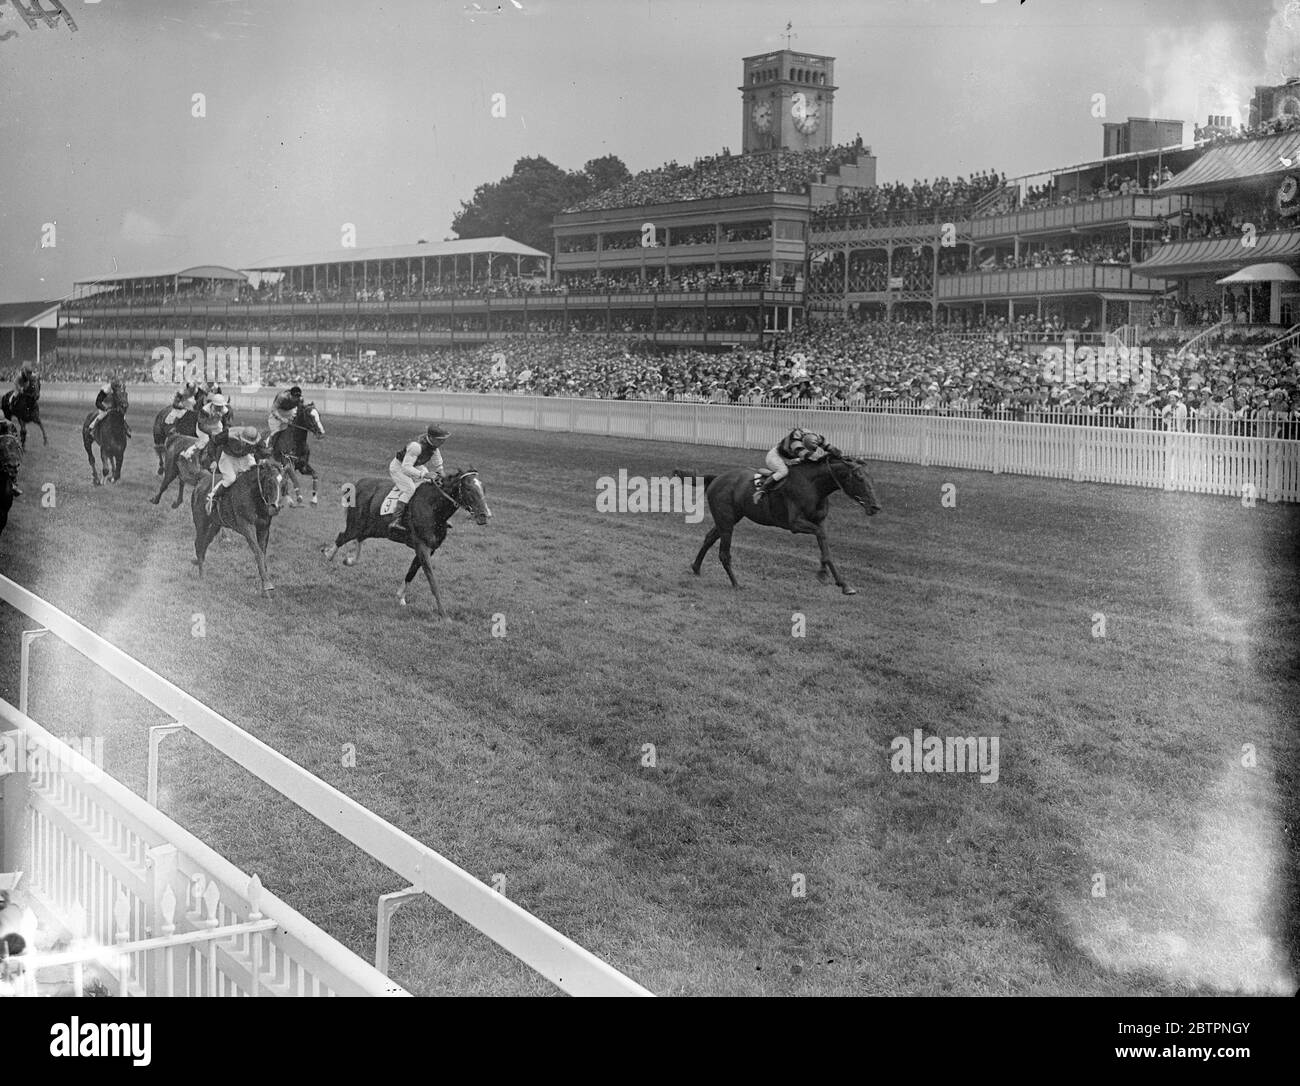 Valerian wins, Ascot Stakes. Sir Abe Baileys Valerian, one the Ascot Stakes on the first day of the Ascot meeting. Mr R Froome's Kept-On was second and Sir Calidore, owned by Mr R Redmen, was third. Photo shows, the finish of the races with Valerian on right. 15 June 1937 Stock Photo